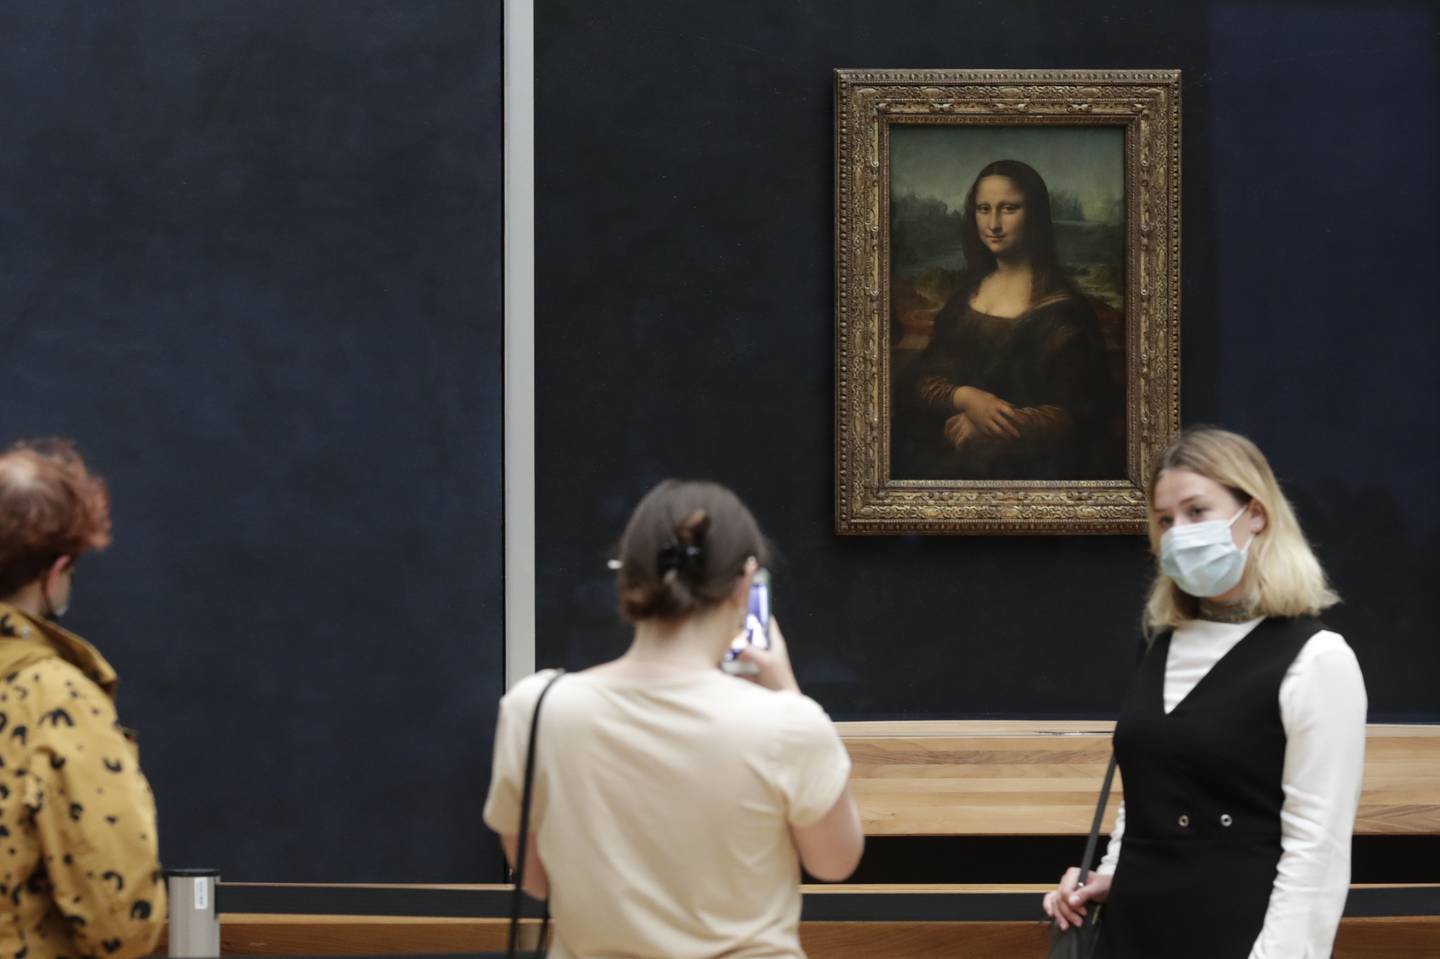 More than one hundred years ago, the 'Mona Lisa' was stolen from the Louvre Museum, Paris, by an employee; it was missing for two years. The theft made global headlines and the artwork world famous. AP 